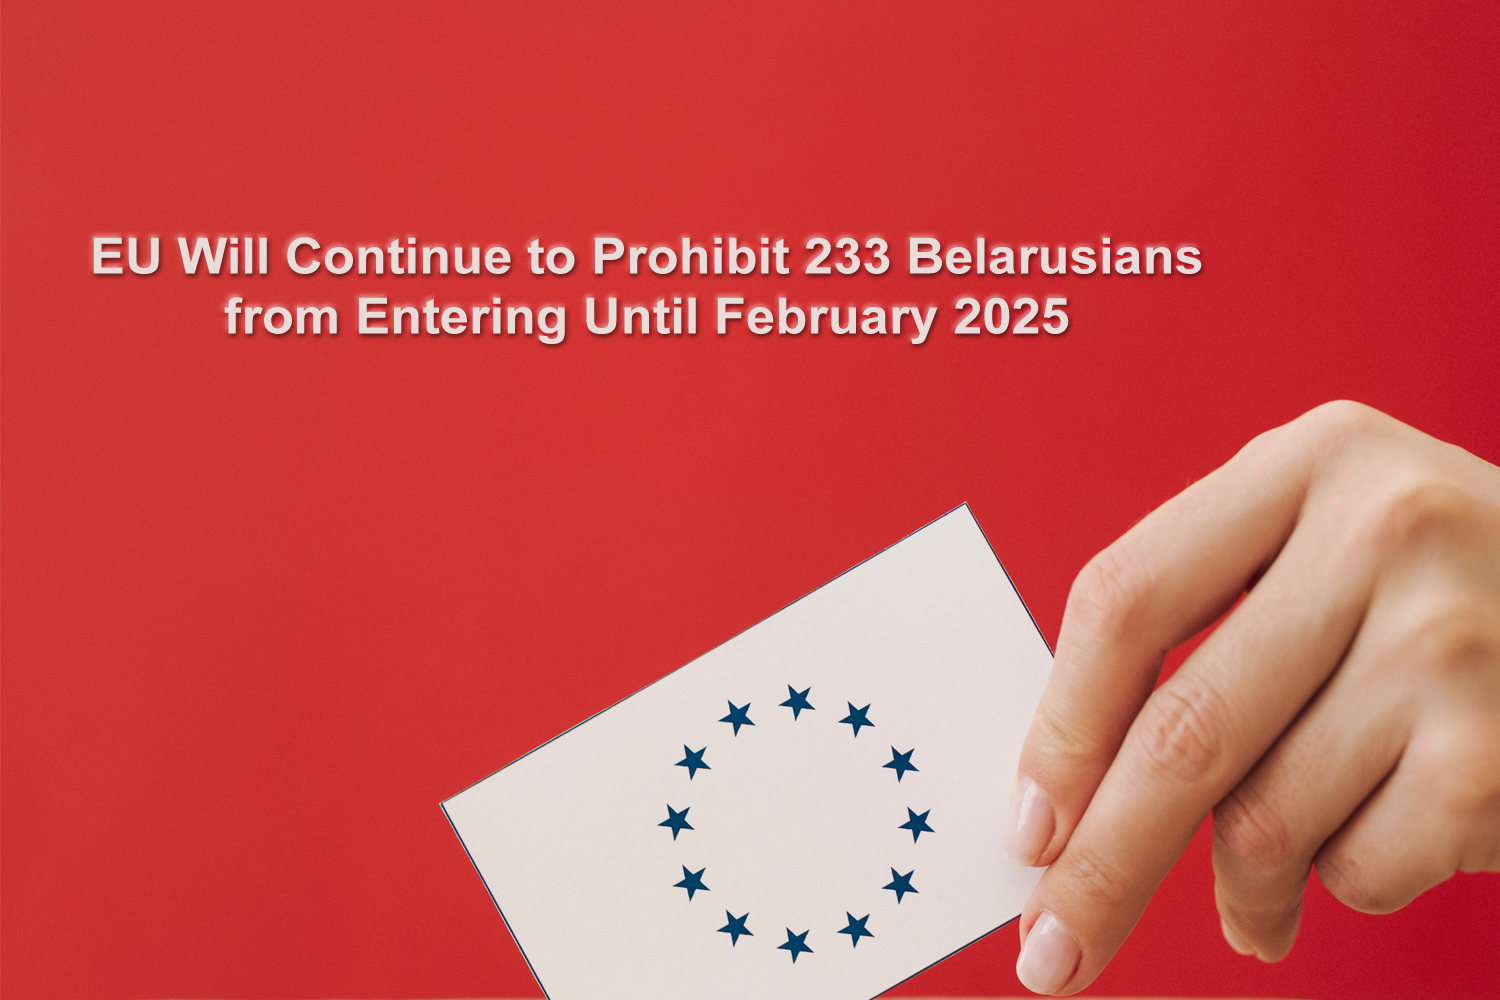 EU Will Continue to Prohibit 233 Belarusians from Entering Until February 2025.